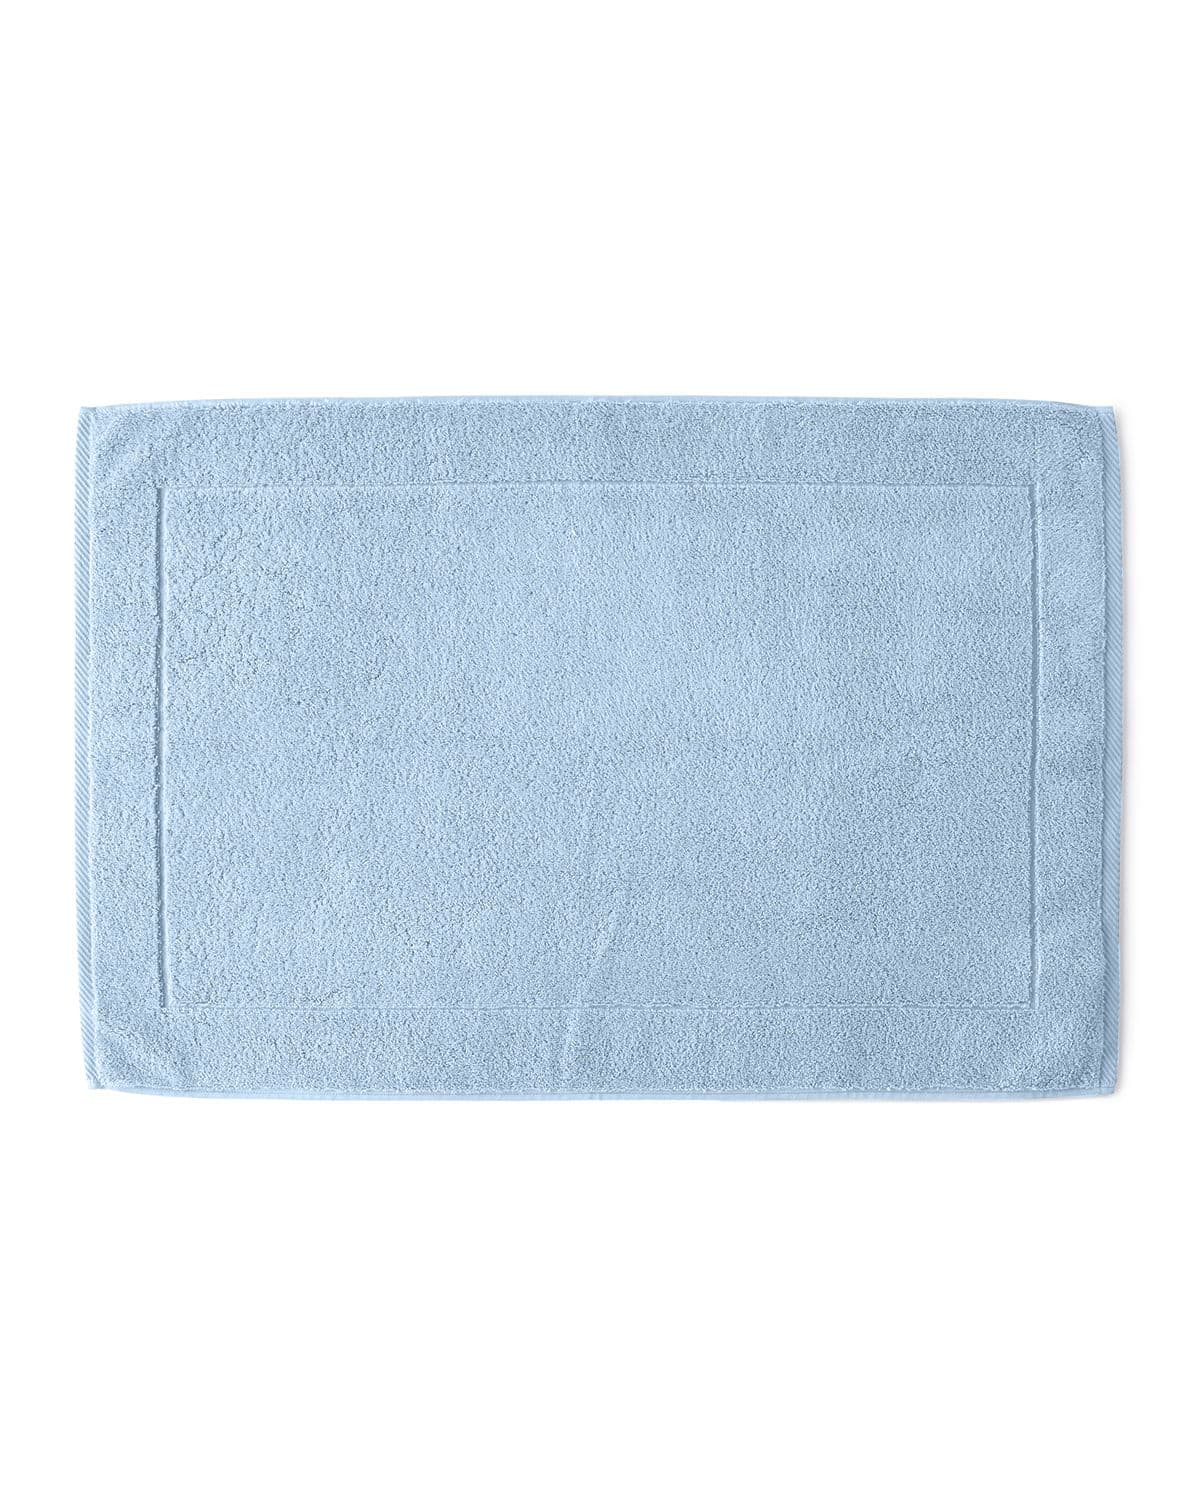 Matouk Marcus Collection Luxury Tub Mat In Sky Blue